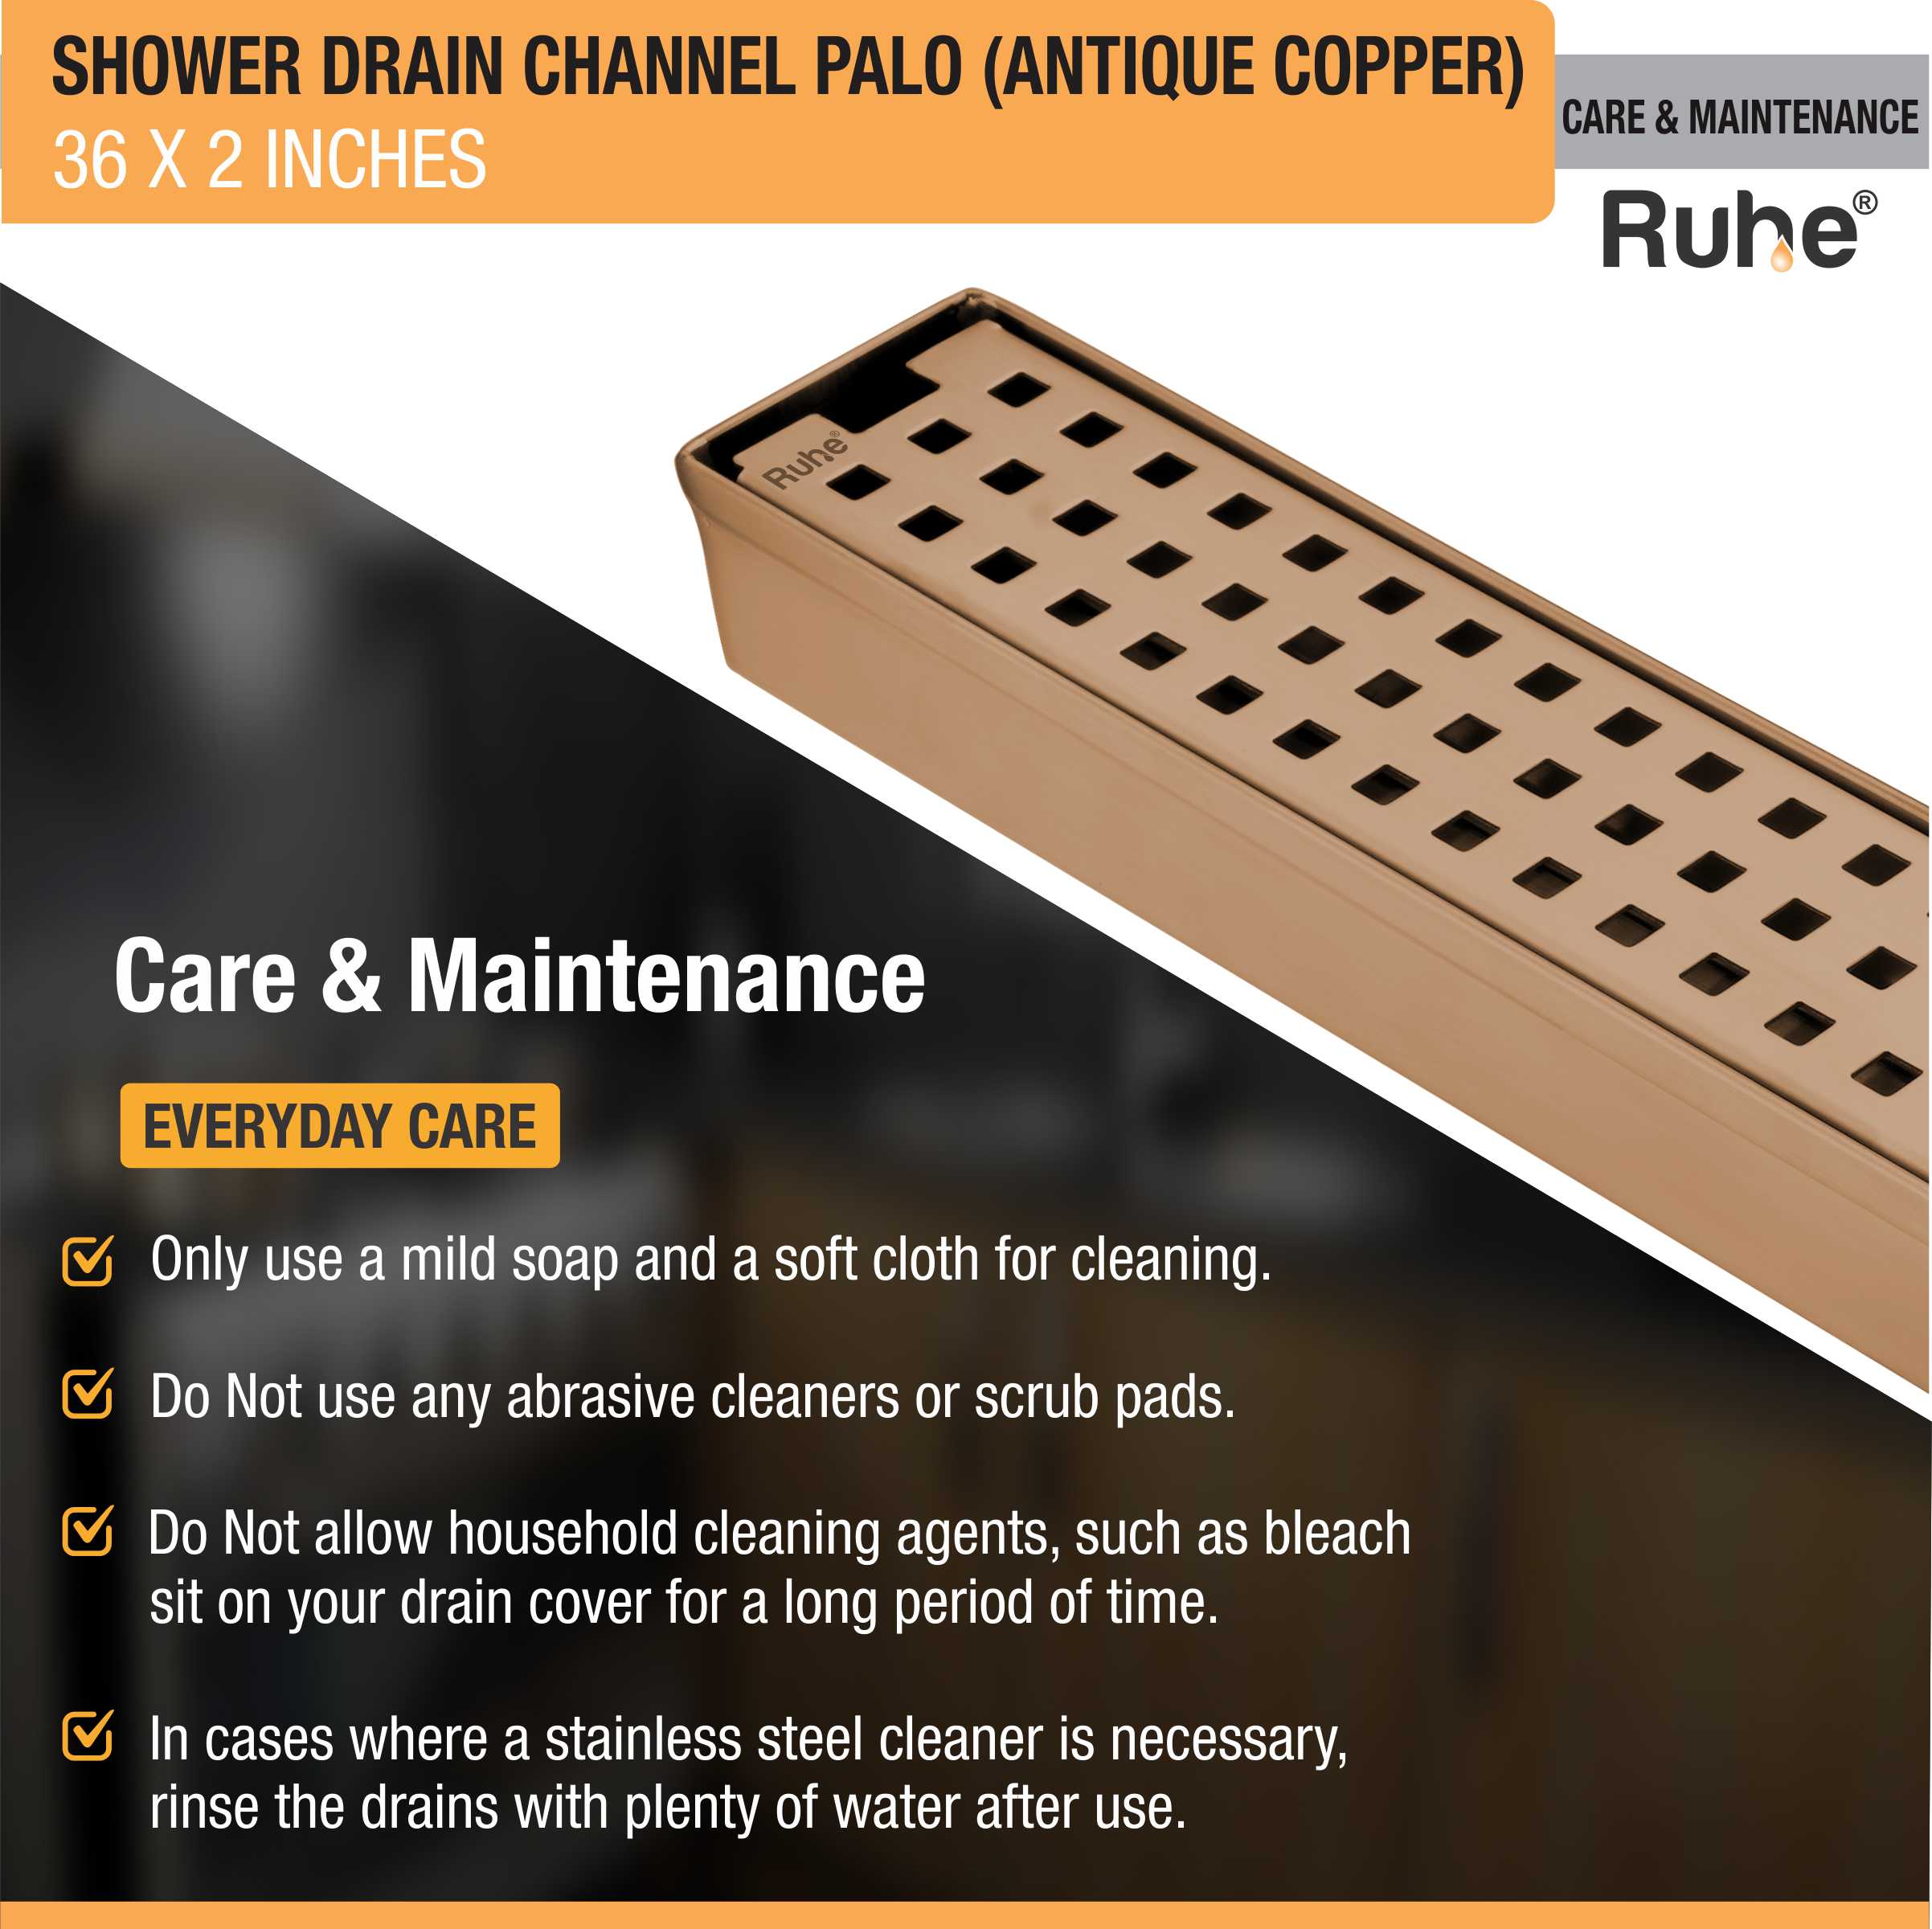 Palo Shower Drain Channel (36 x 2 Inches) ROSE GOLD/ANTIQUE COPPER care and maintenance